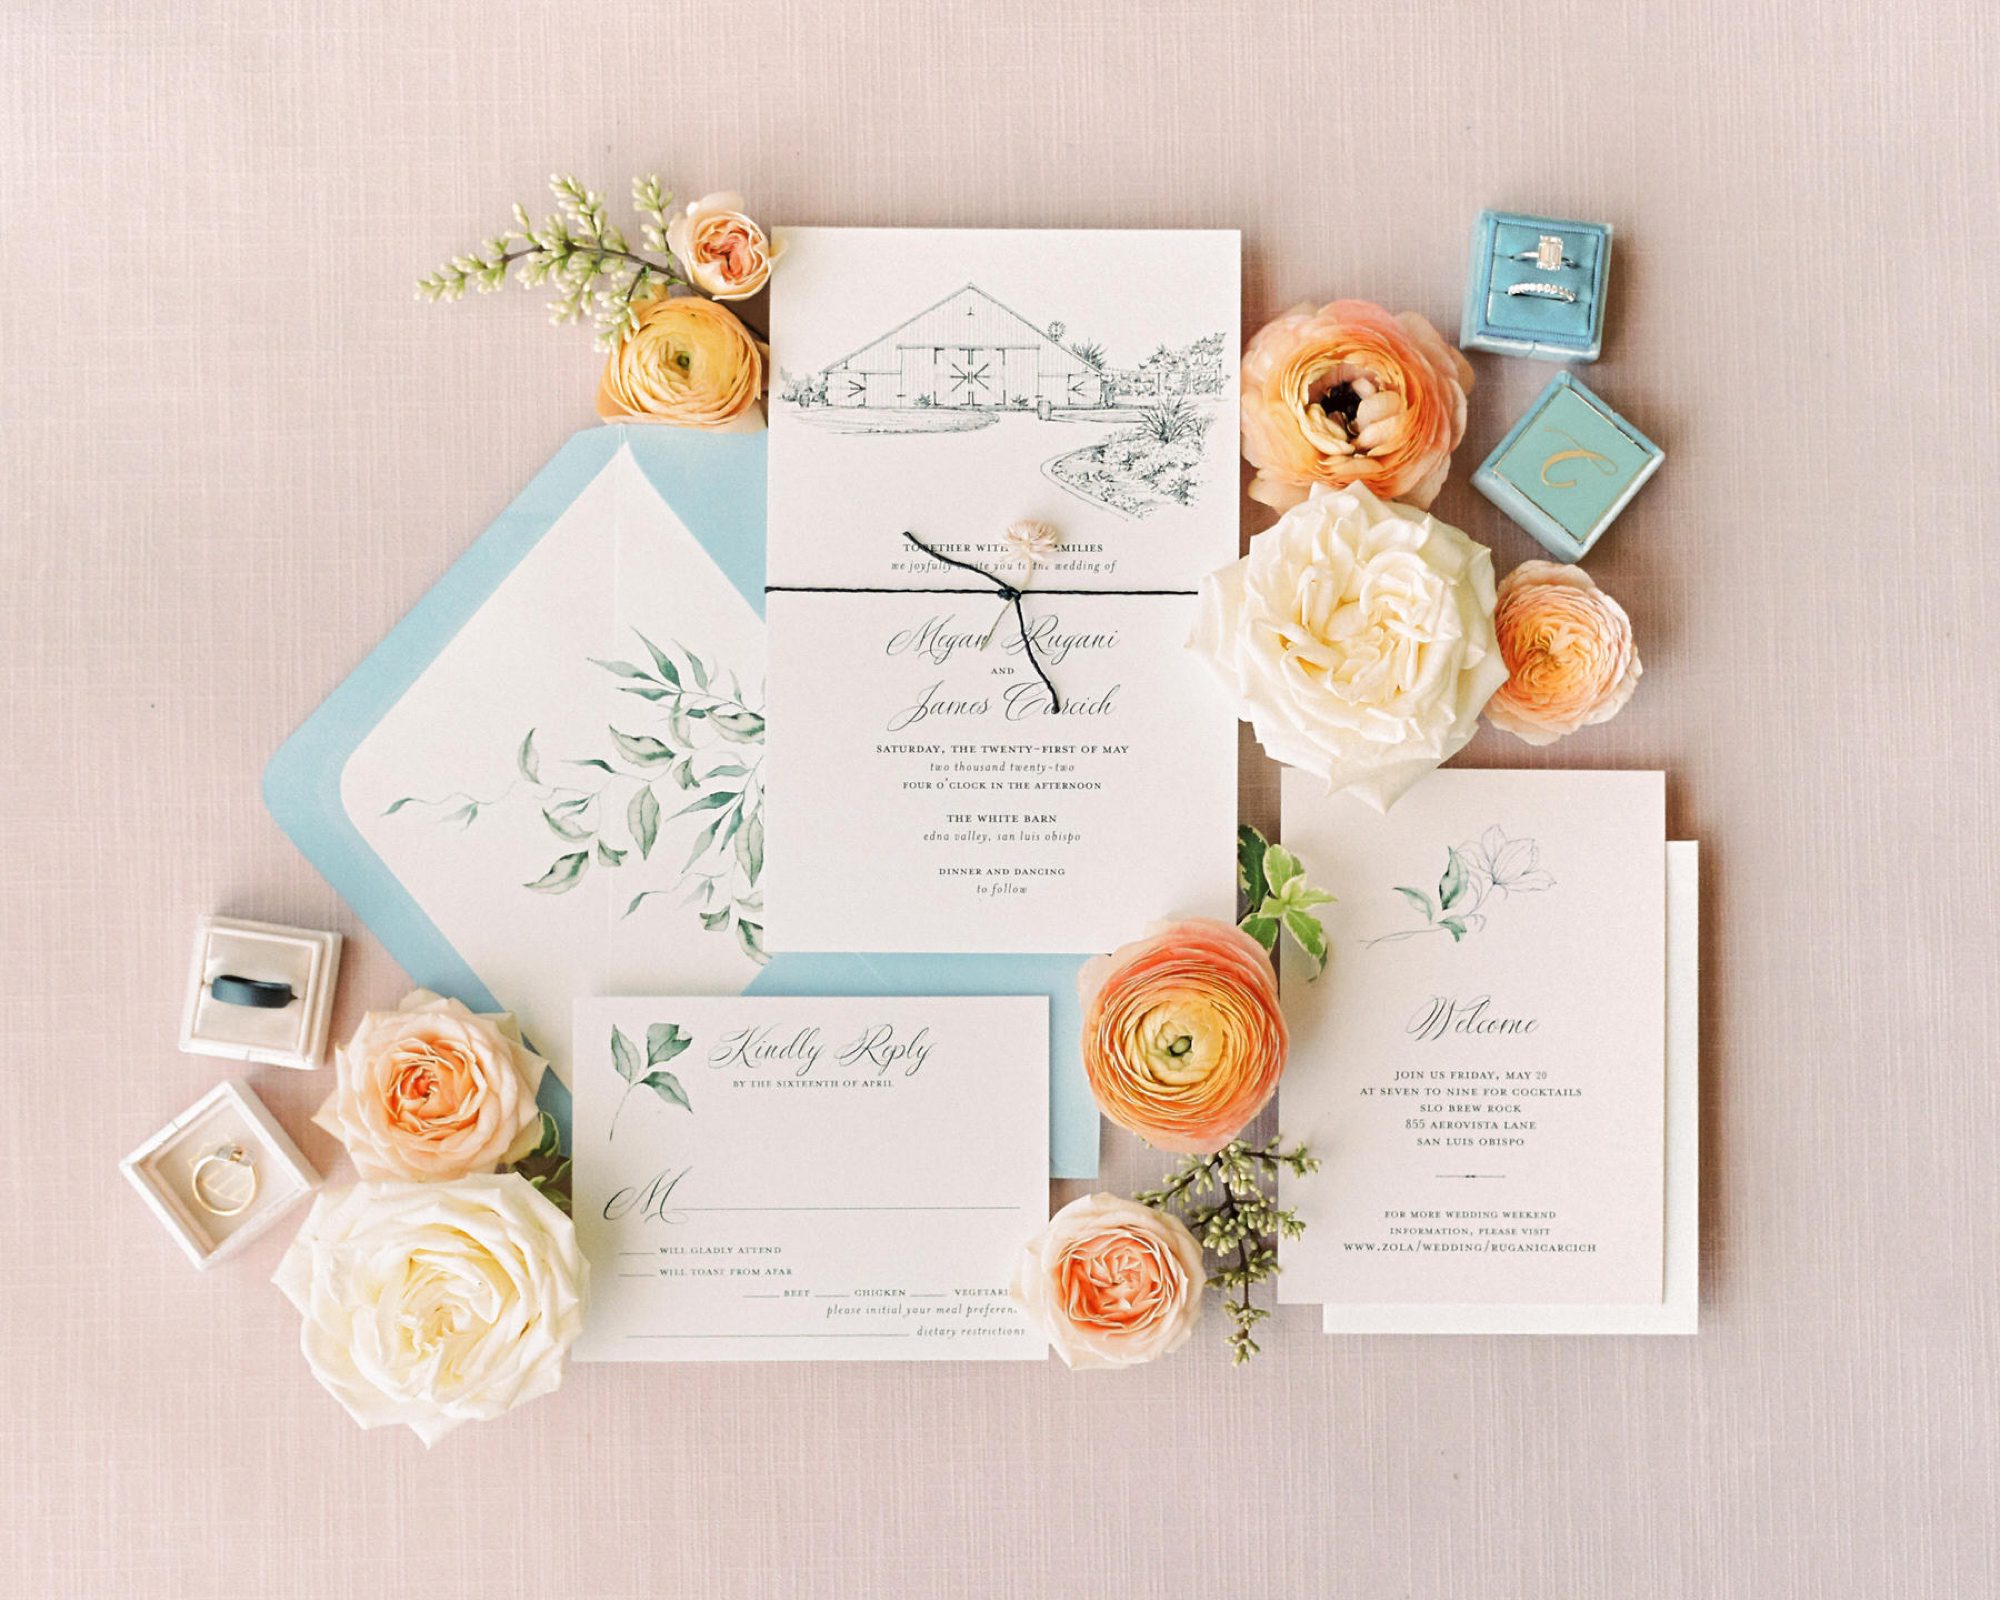 Invitation suite by Tracy Rossi Designs with illustration of the White Barn Edna Valley photographed by san luis obispo wedding photographers jessica sofranko